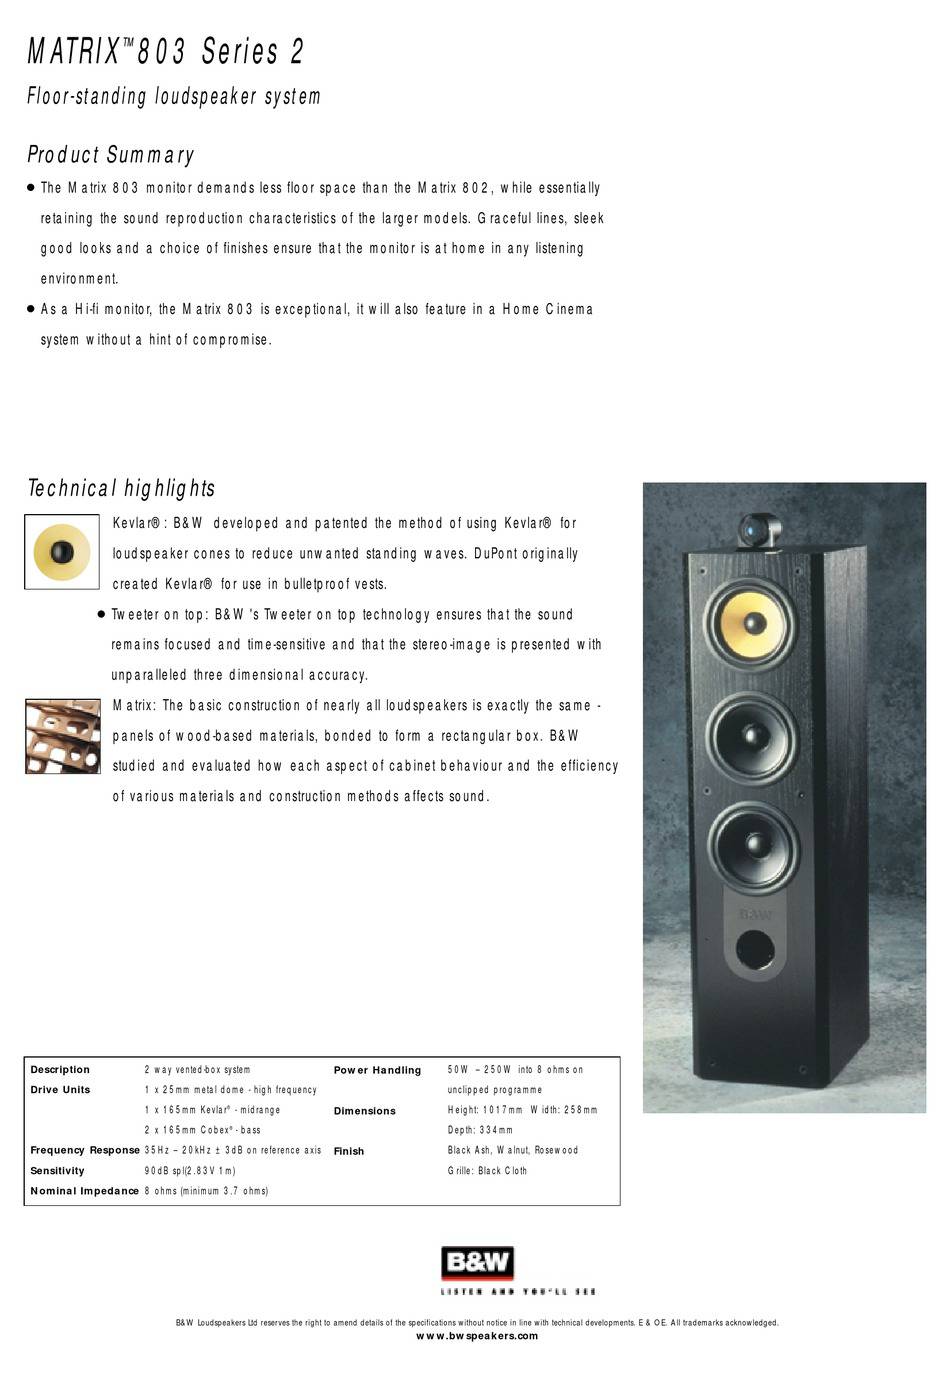 Bowers and Wilkins 803 (Matrix S2)